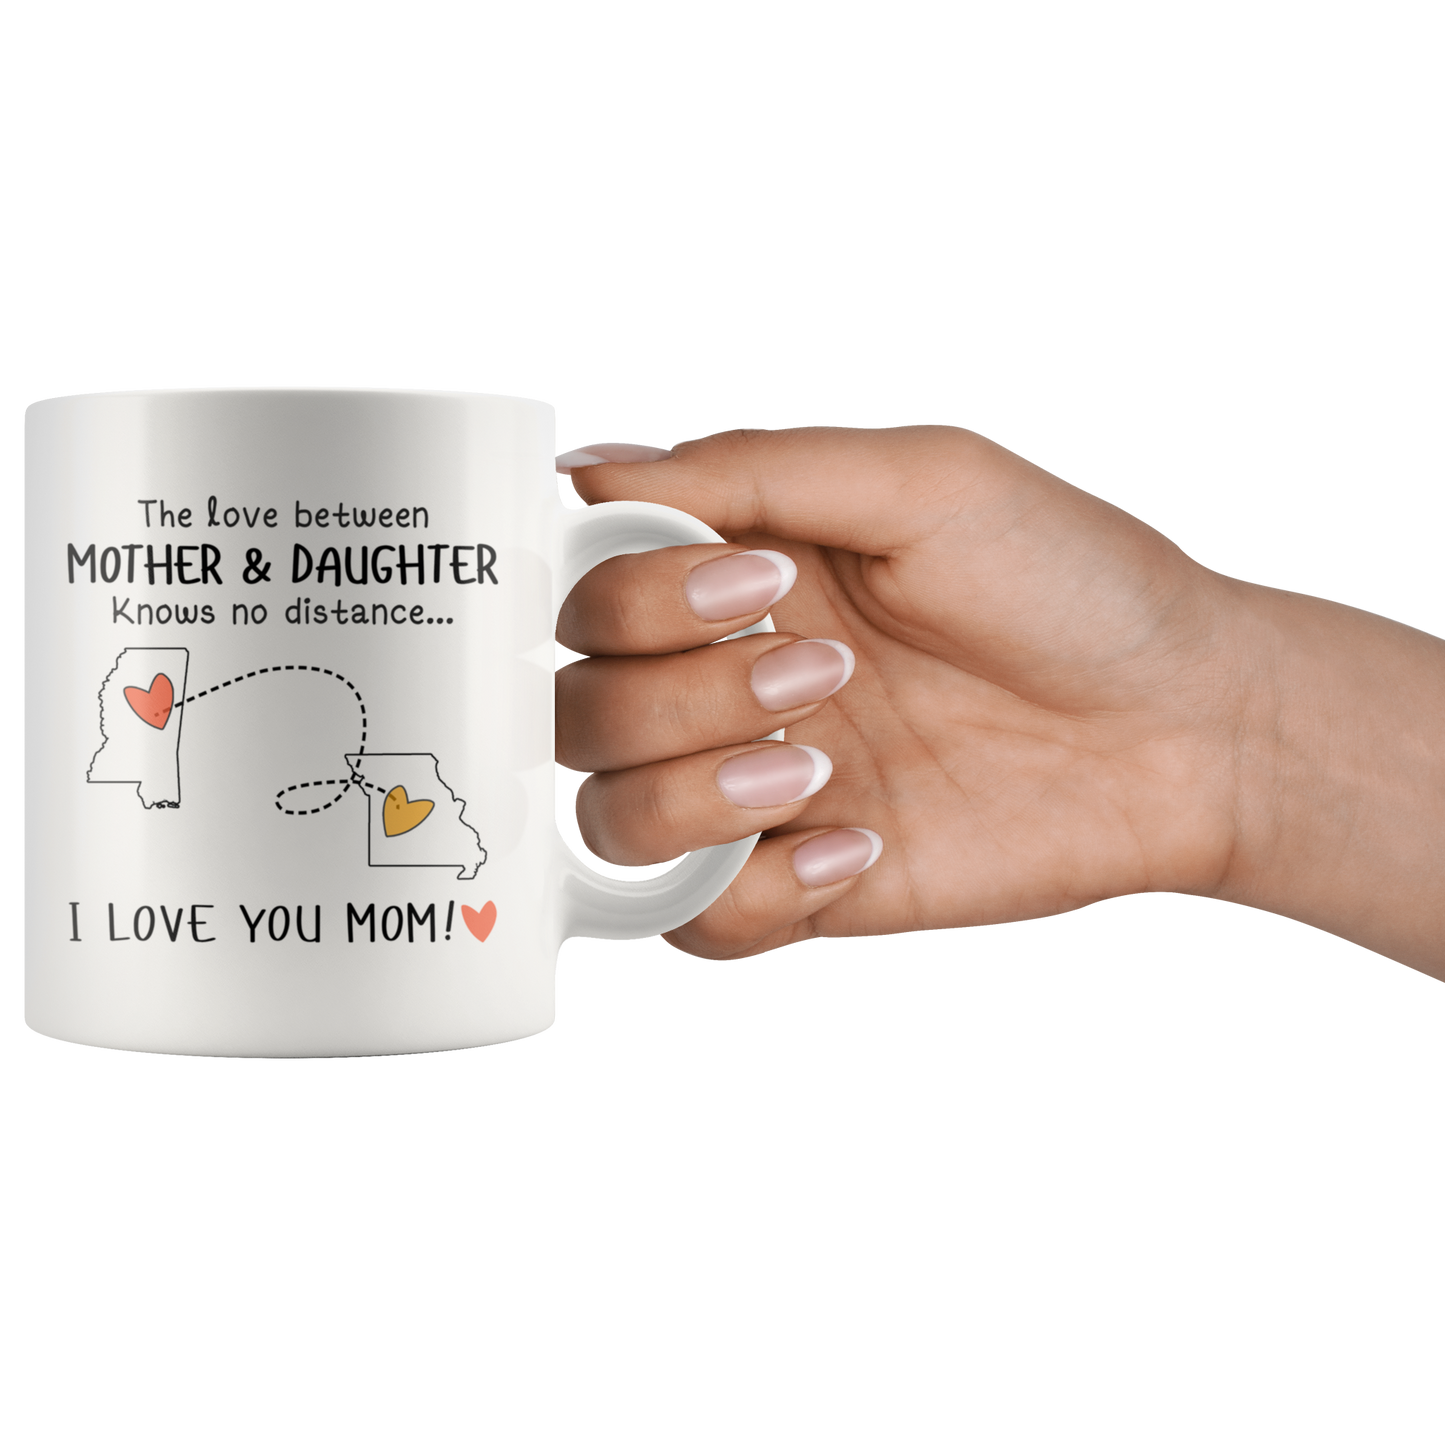 HNV-CUS-GRAND-sp-25926 - [ Mississippi | Missouri ] (mug_11oz_white) Mothers Day Gifts Personalized Mother Day Gifts Coffee Mug F